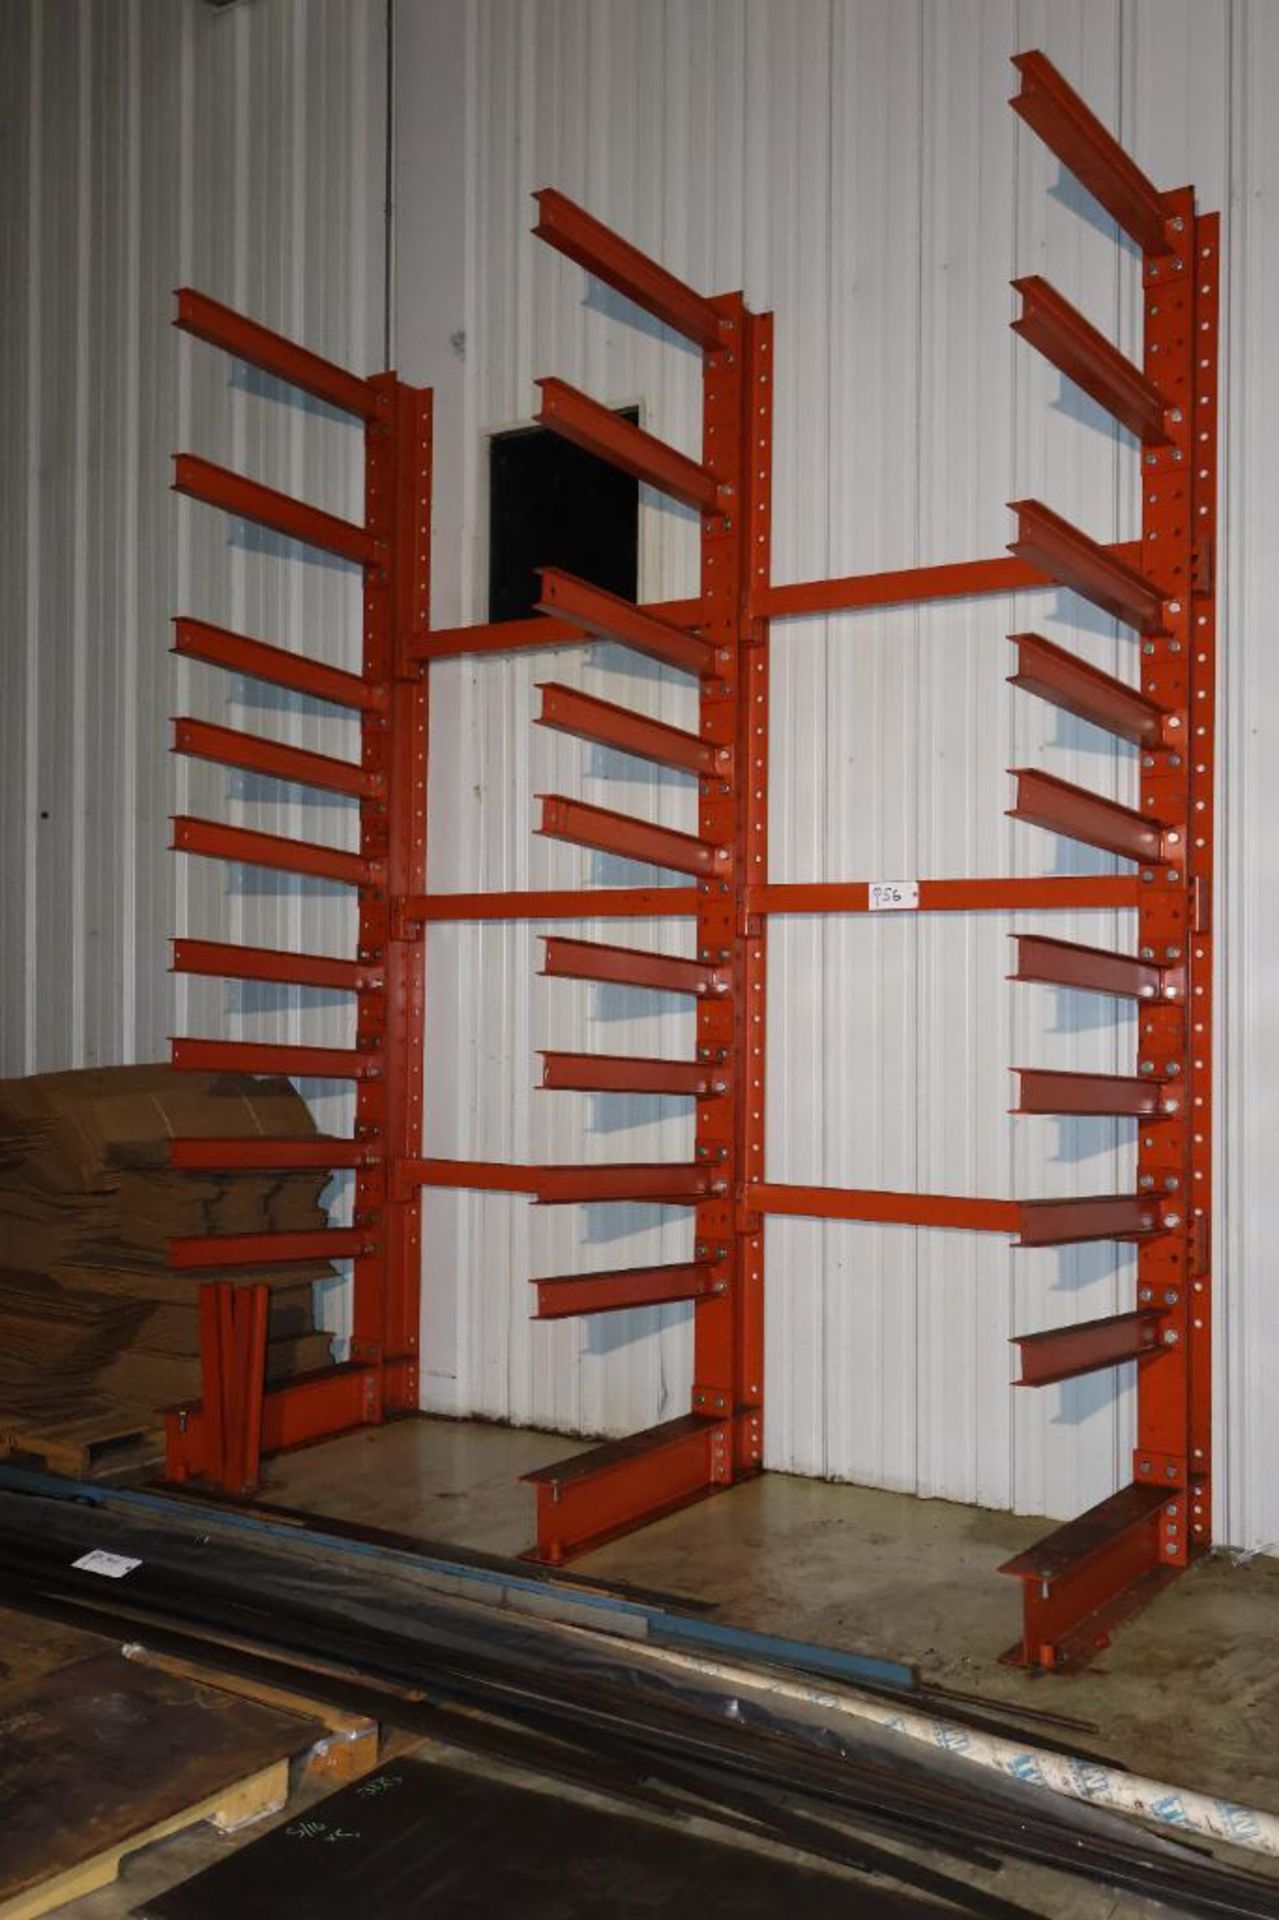 Cantilever rack 12' x 44" uprights, 48" beams